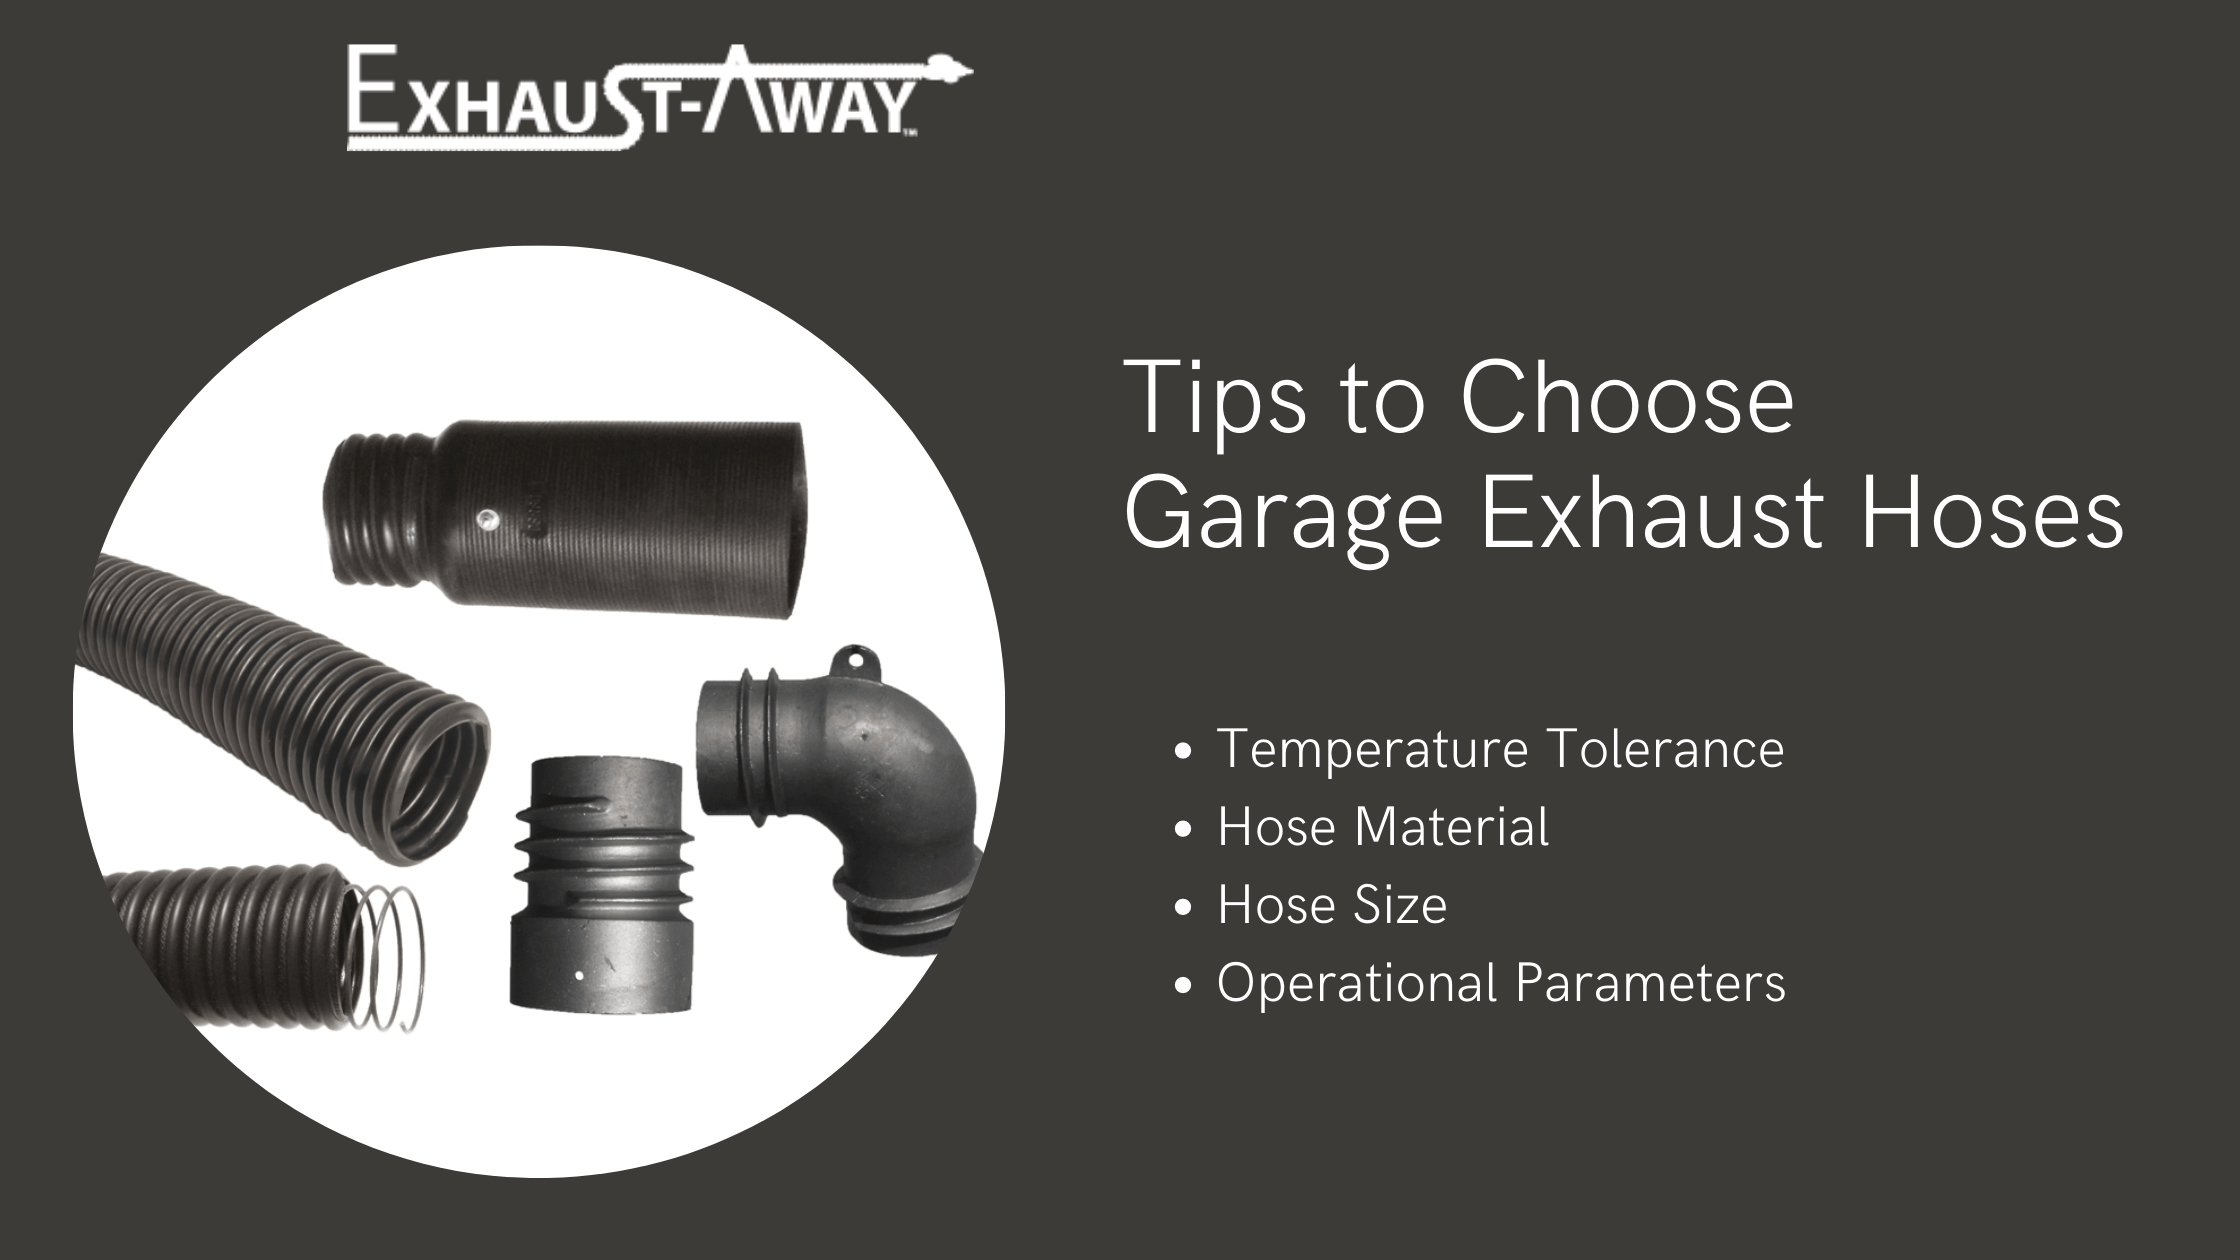 Tips to Choose Garage Exhaust Hoses